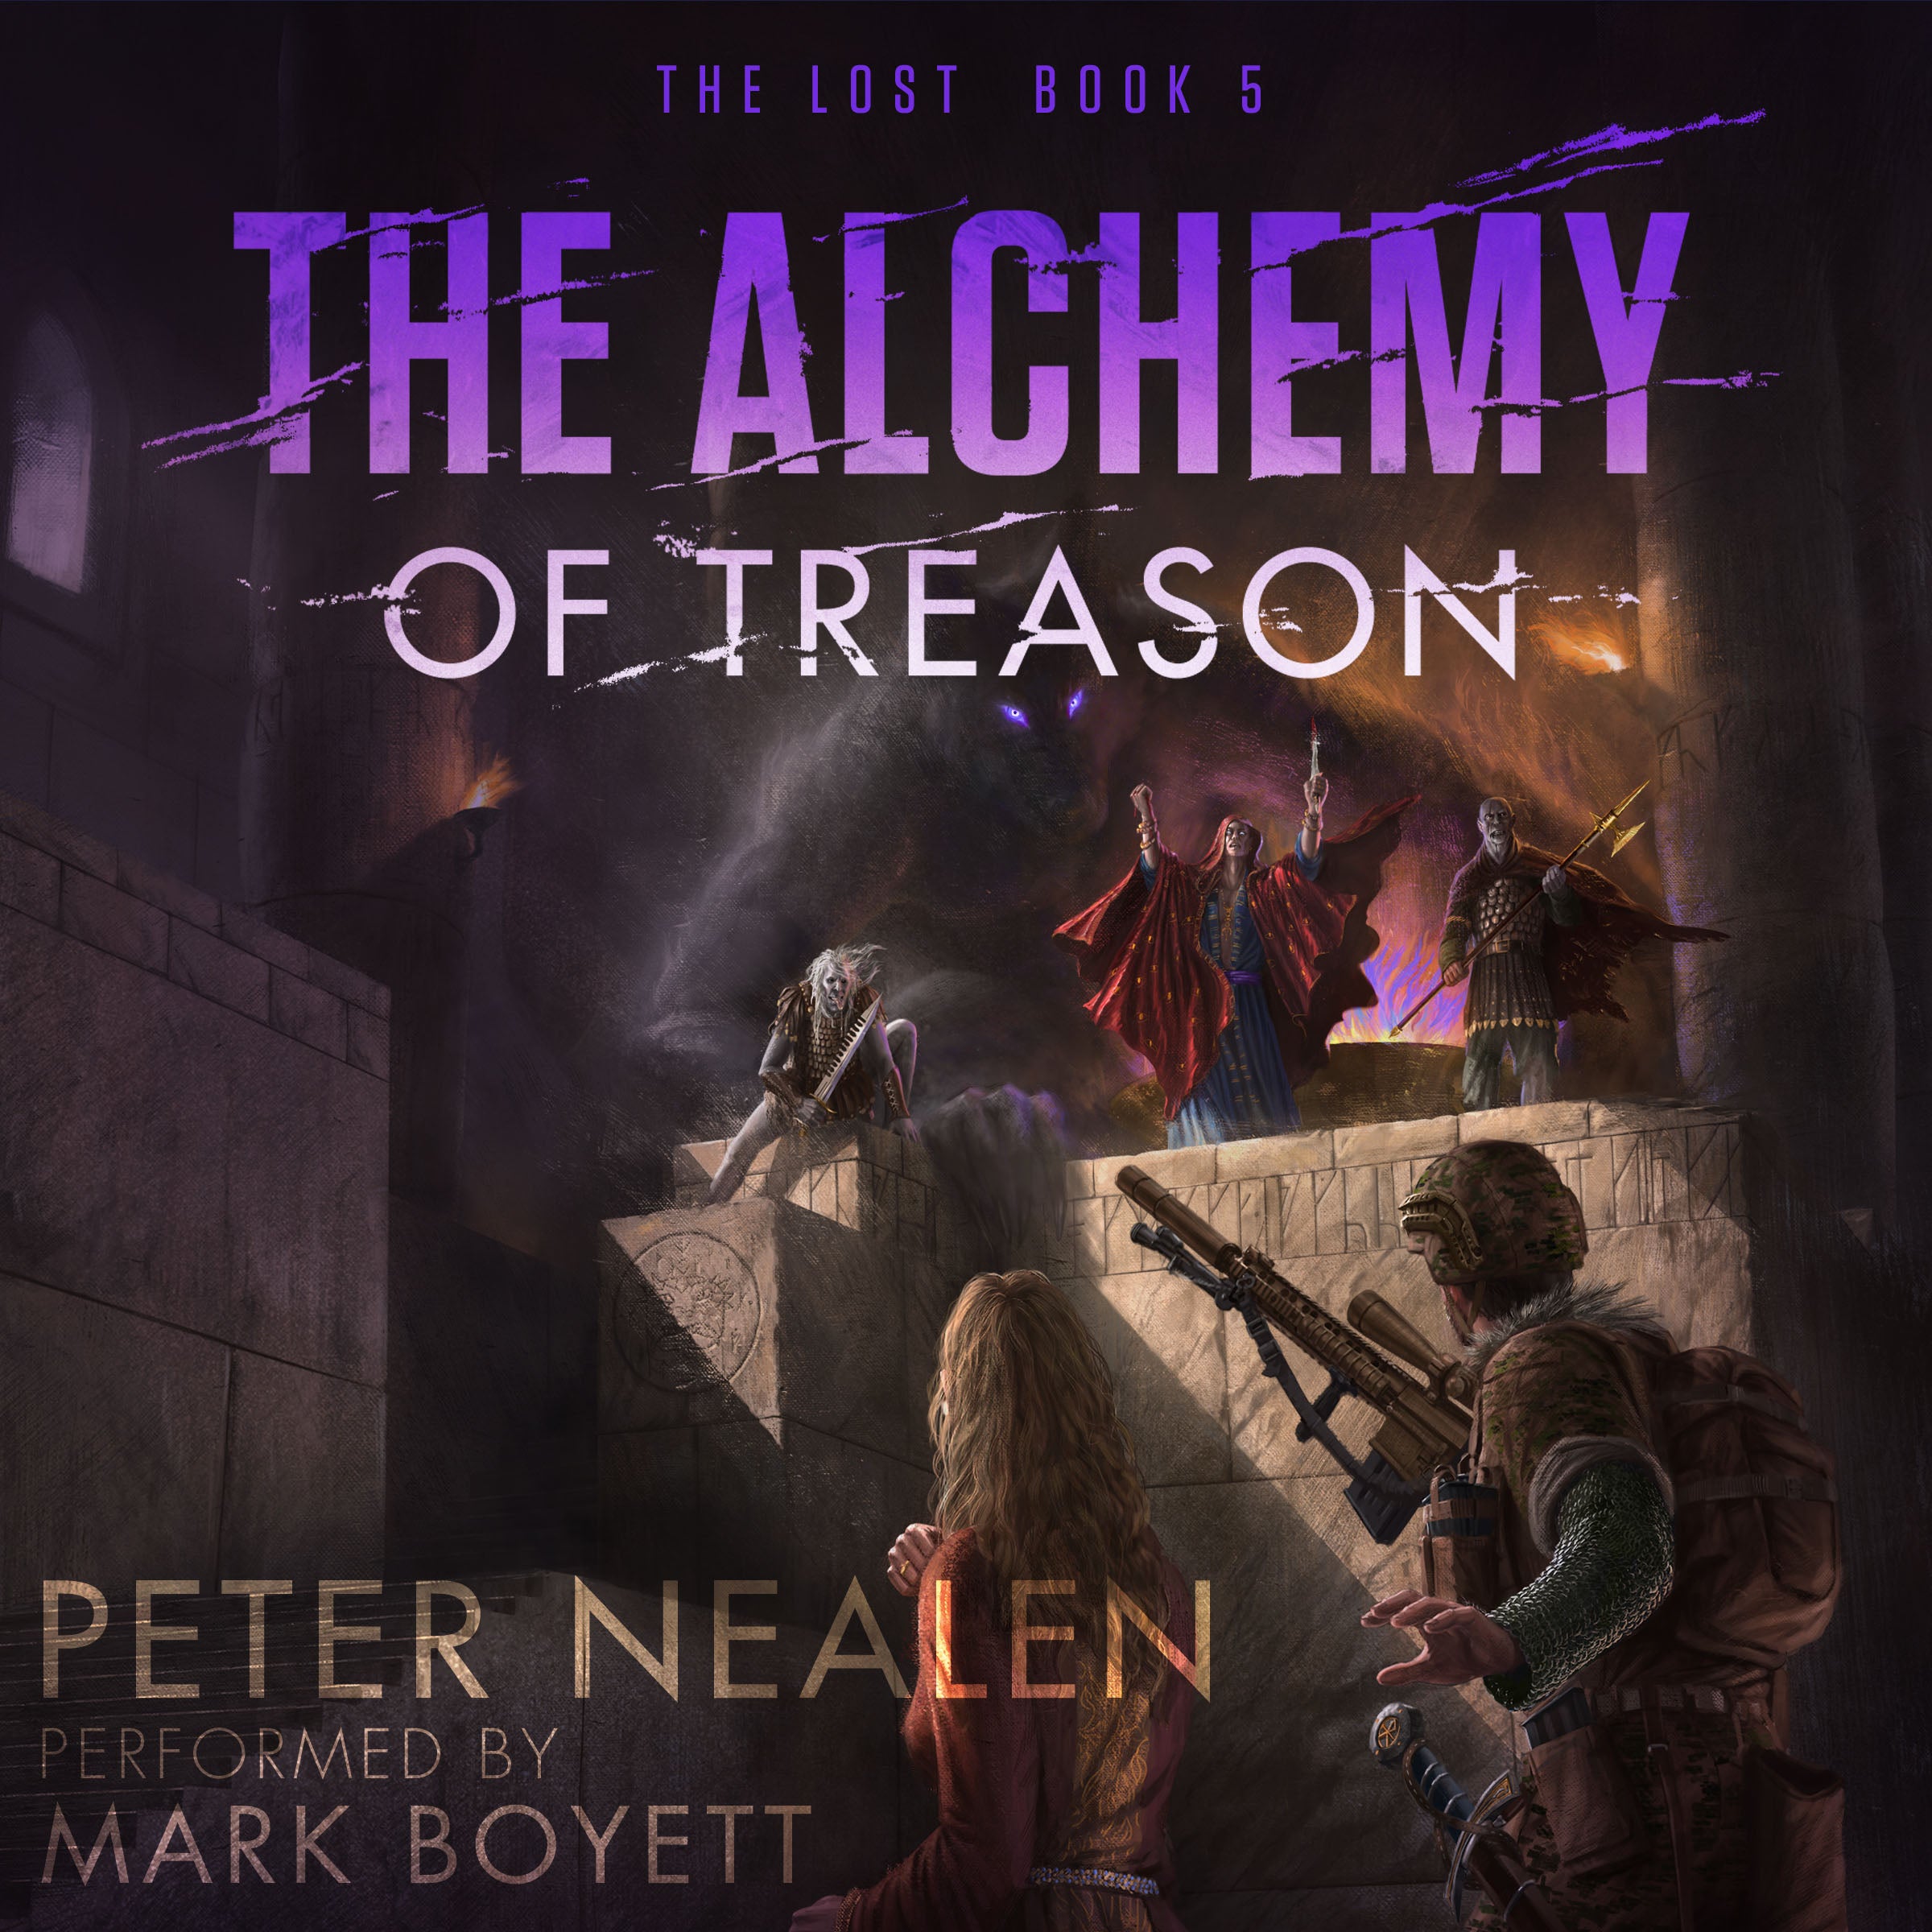 The Alchemy of Treason Audiobook (The Lost, Book 5)